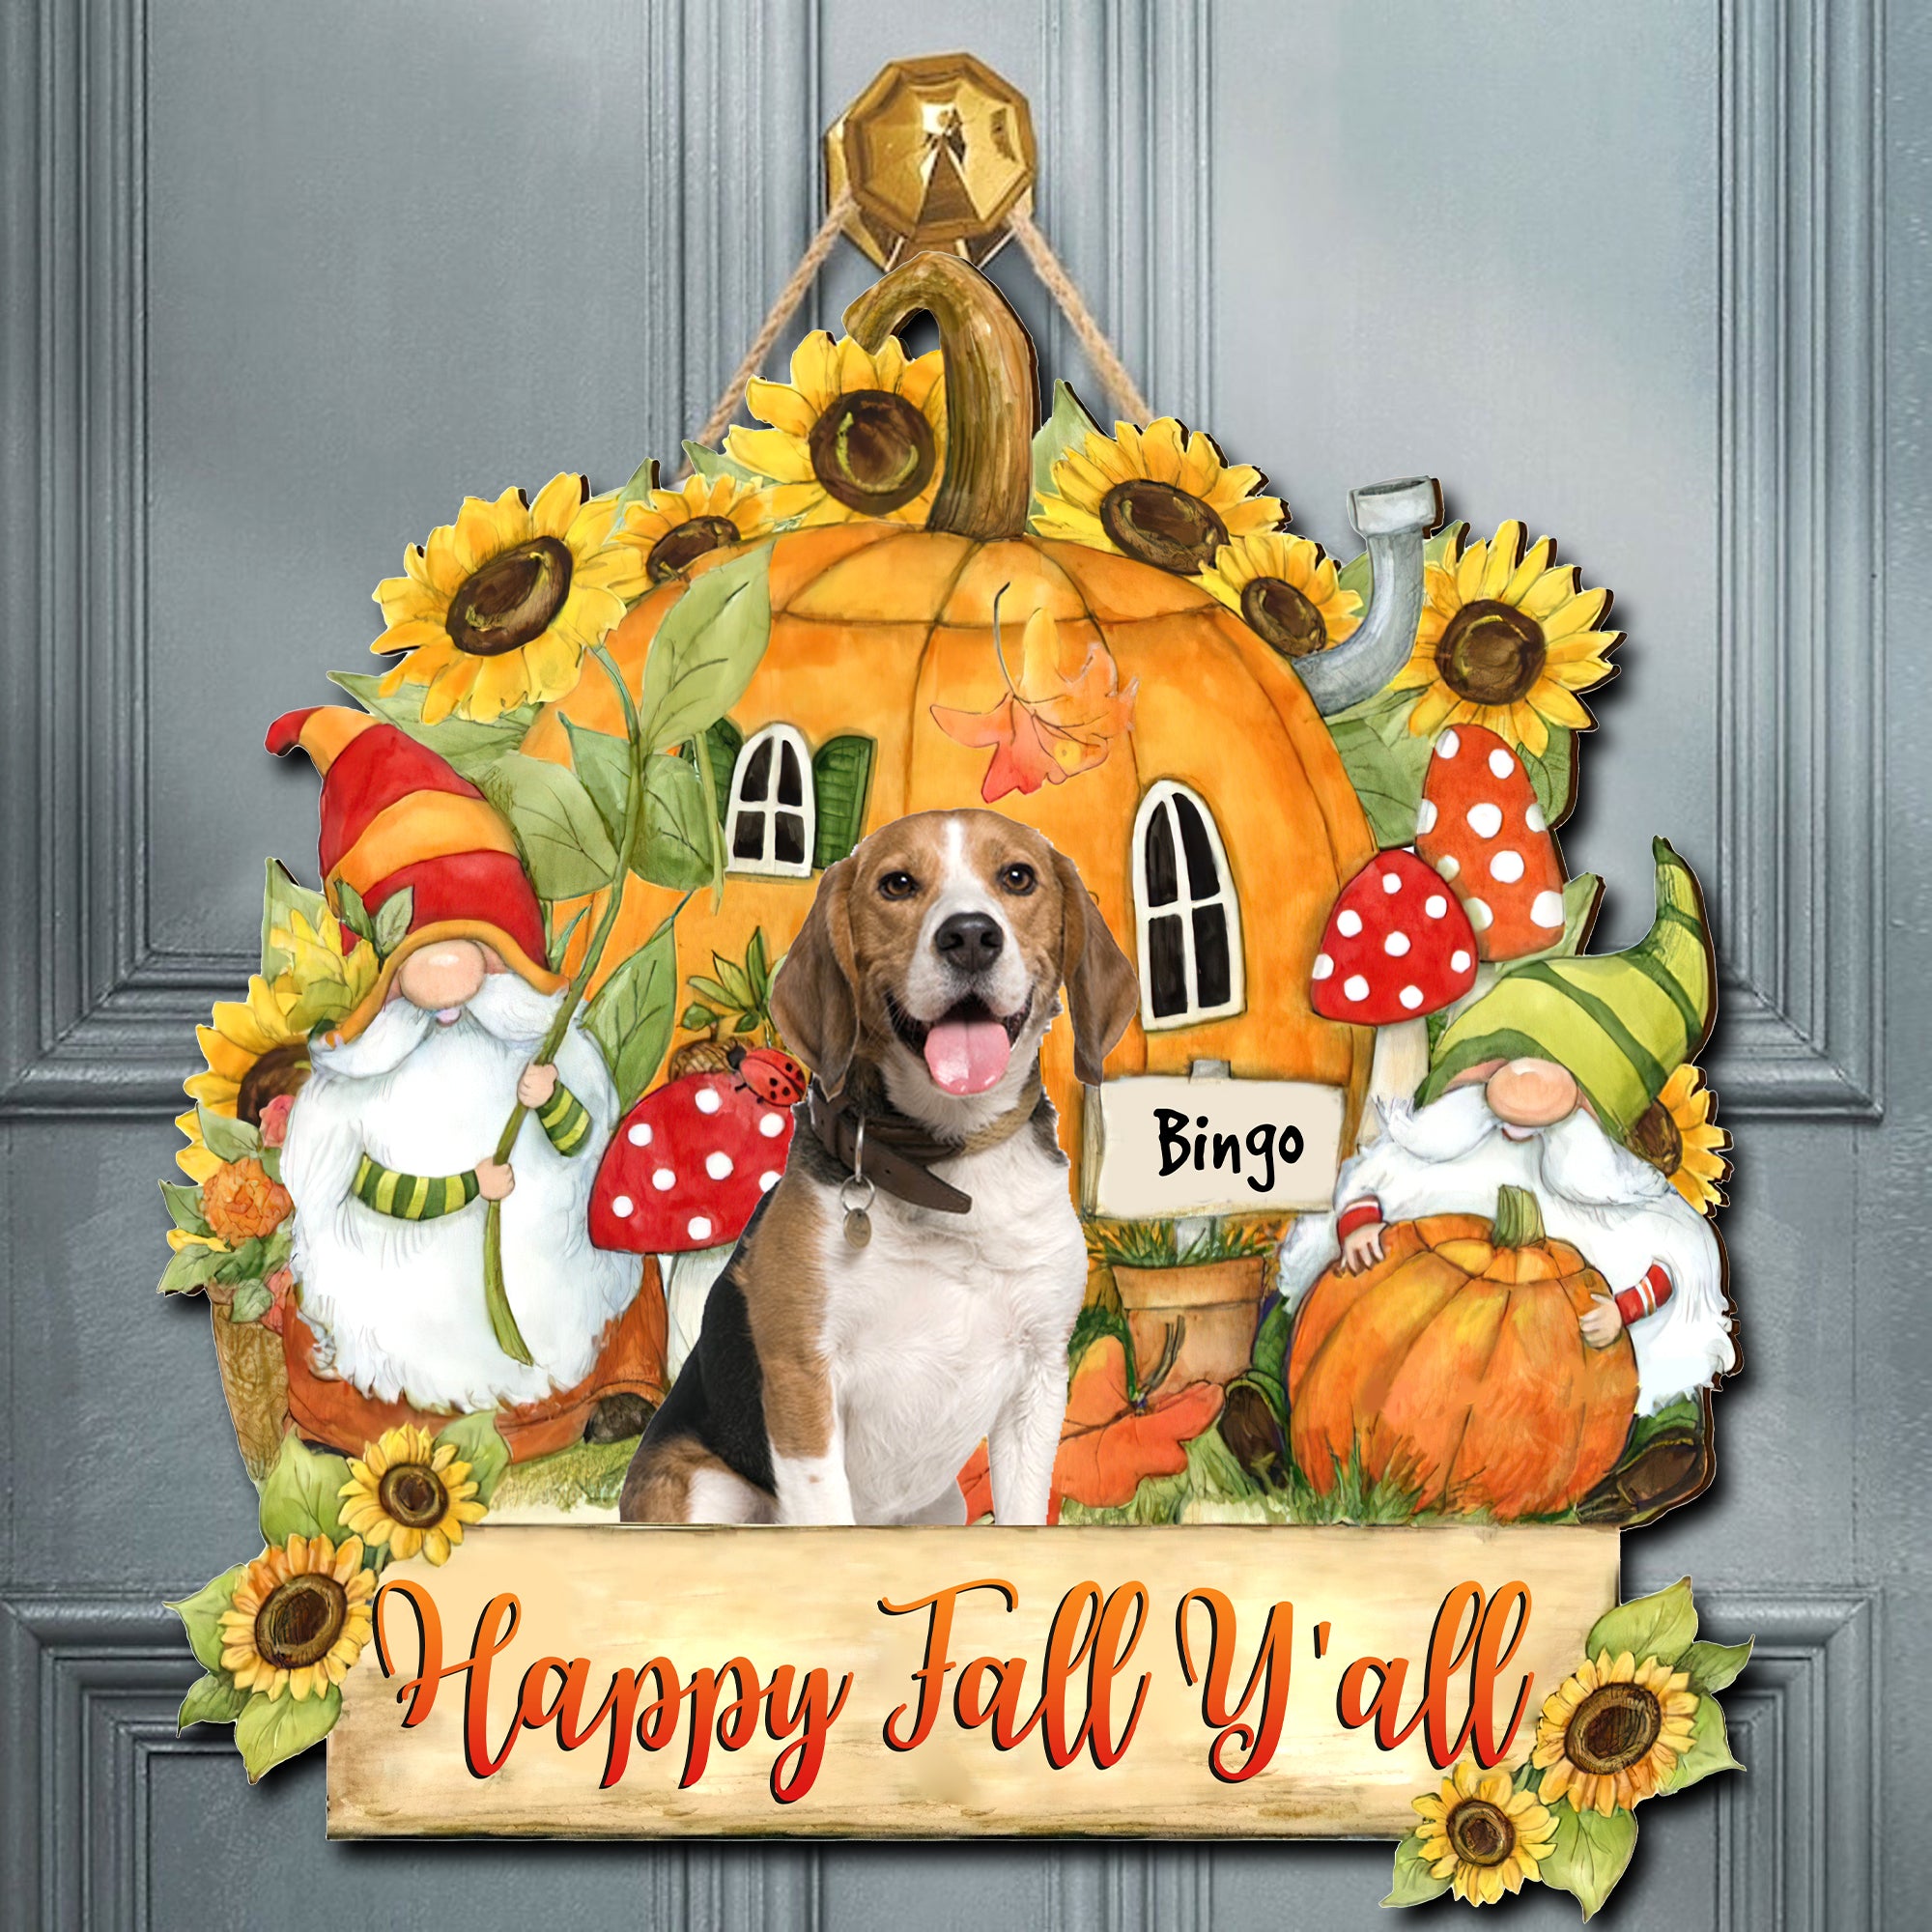 Happy Fall Y'all - Personalized Photo Wooden Door Sign - Halloween For Pets - Halloween Gift